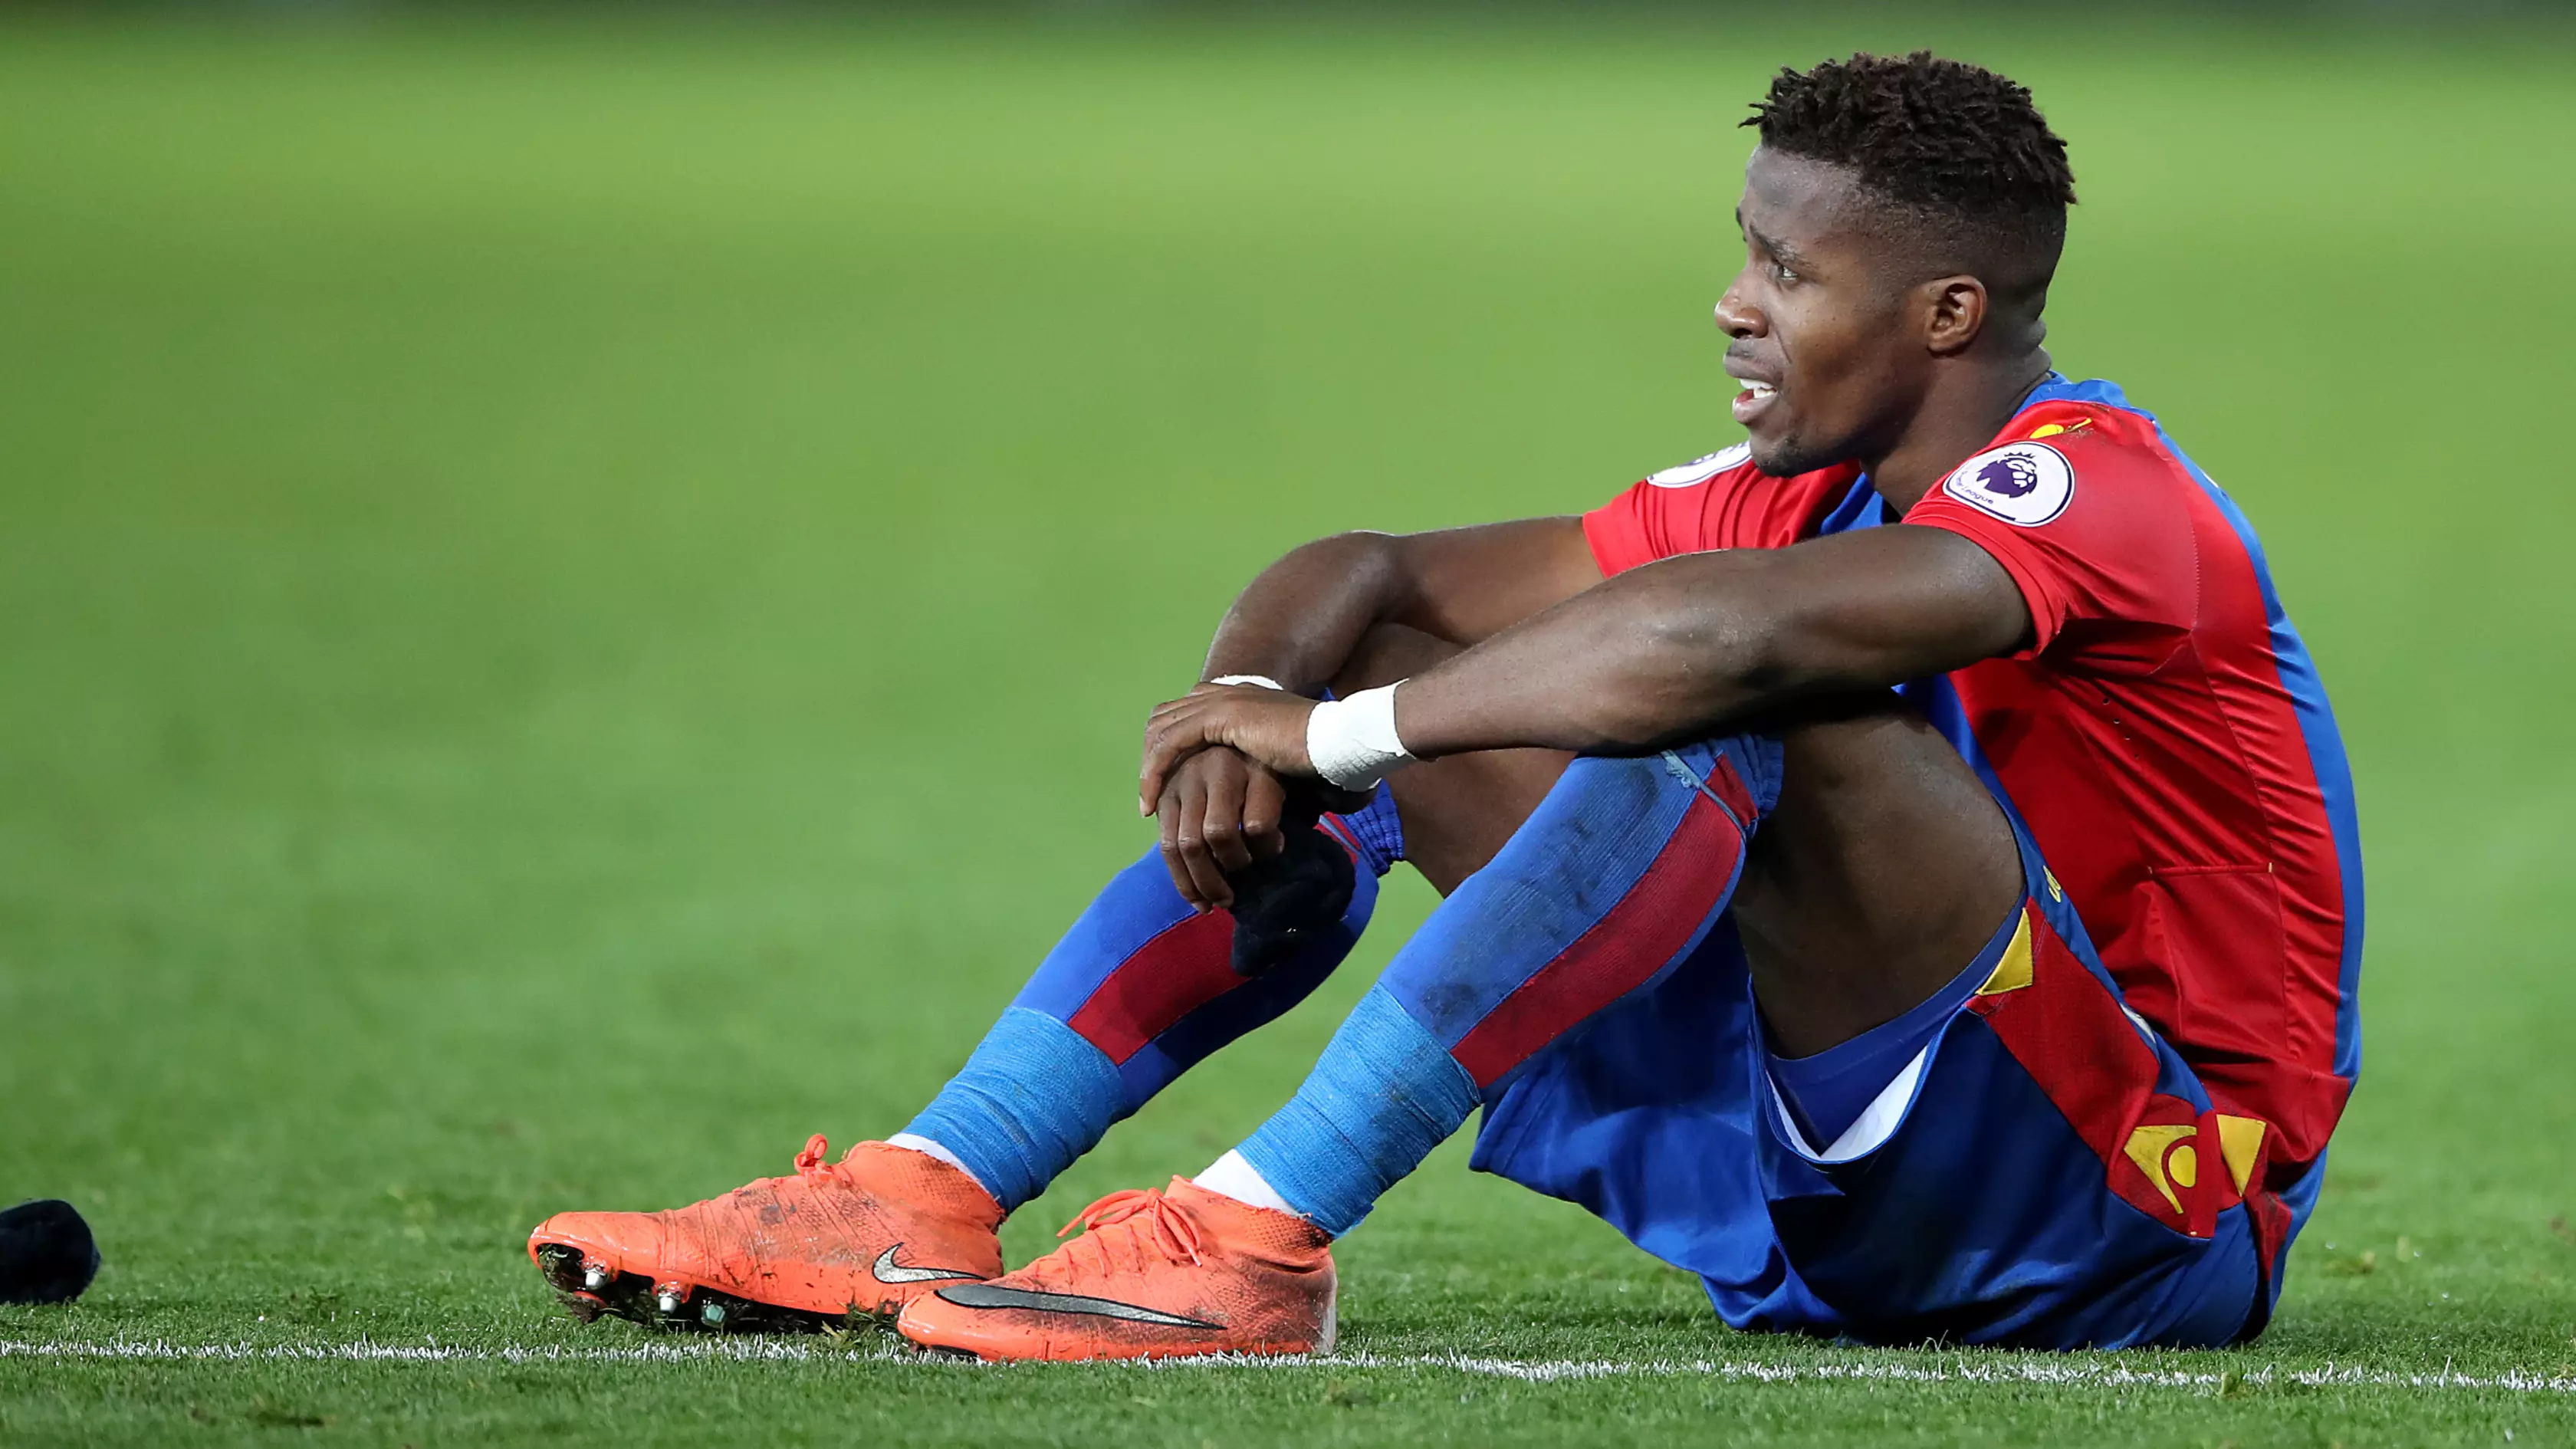 German Star Reportedly Set For Crystal Palace, With Wilfried Zaha Going The Other Way